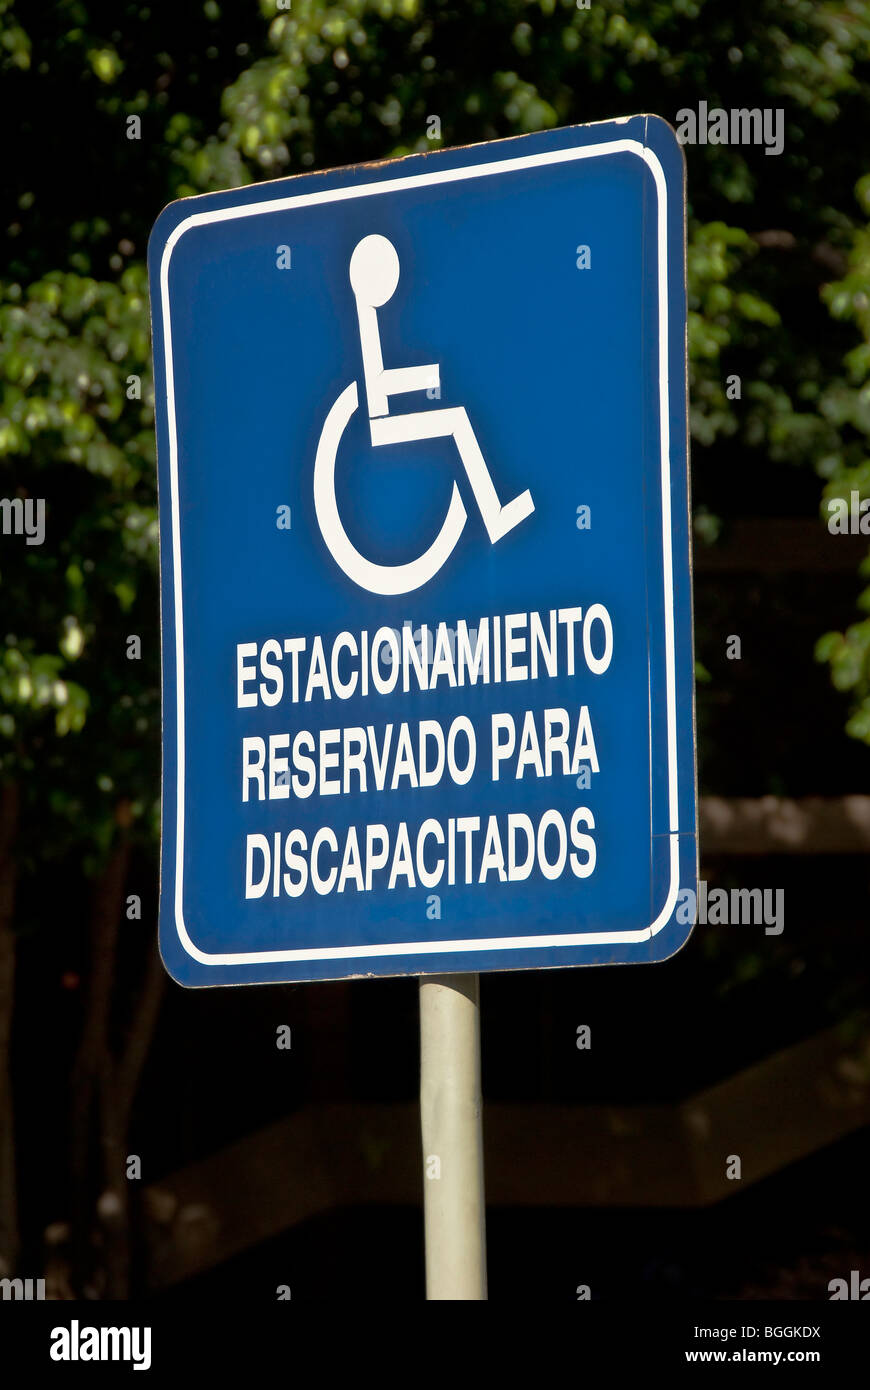 Handicapped parking sign in Spanish in Buenos Aires, Argentina Stock Photo